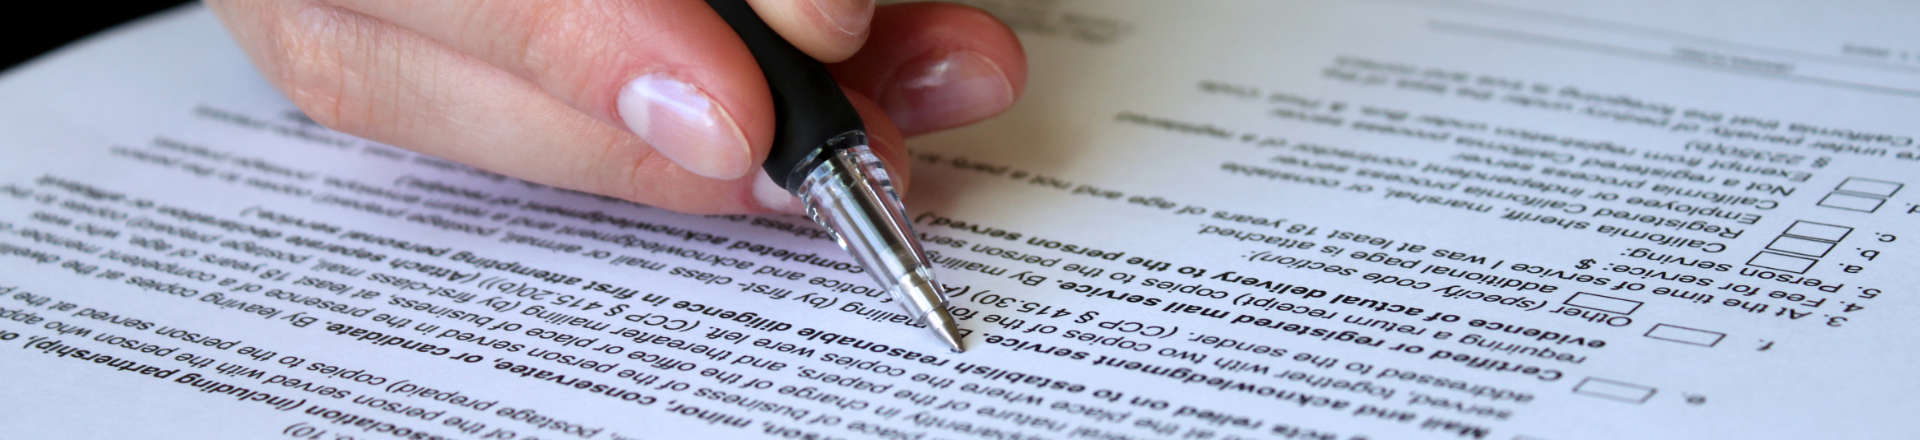 a person reading the agreement conditions